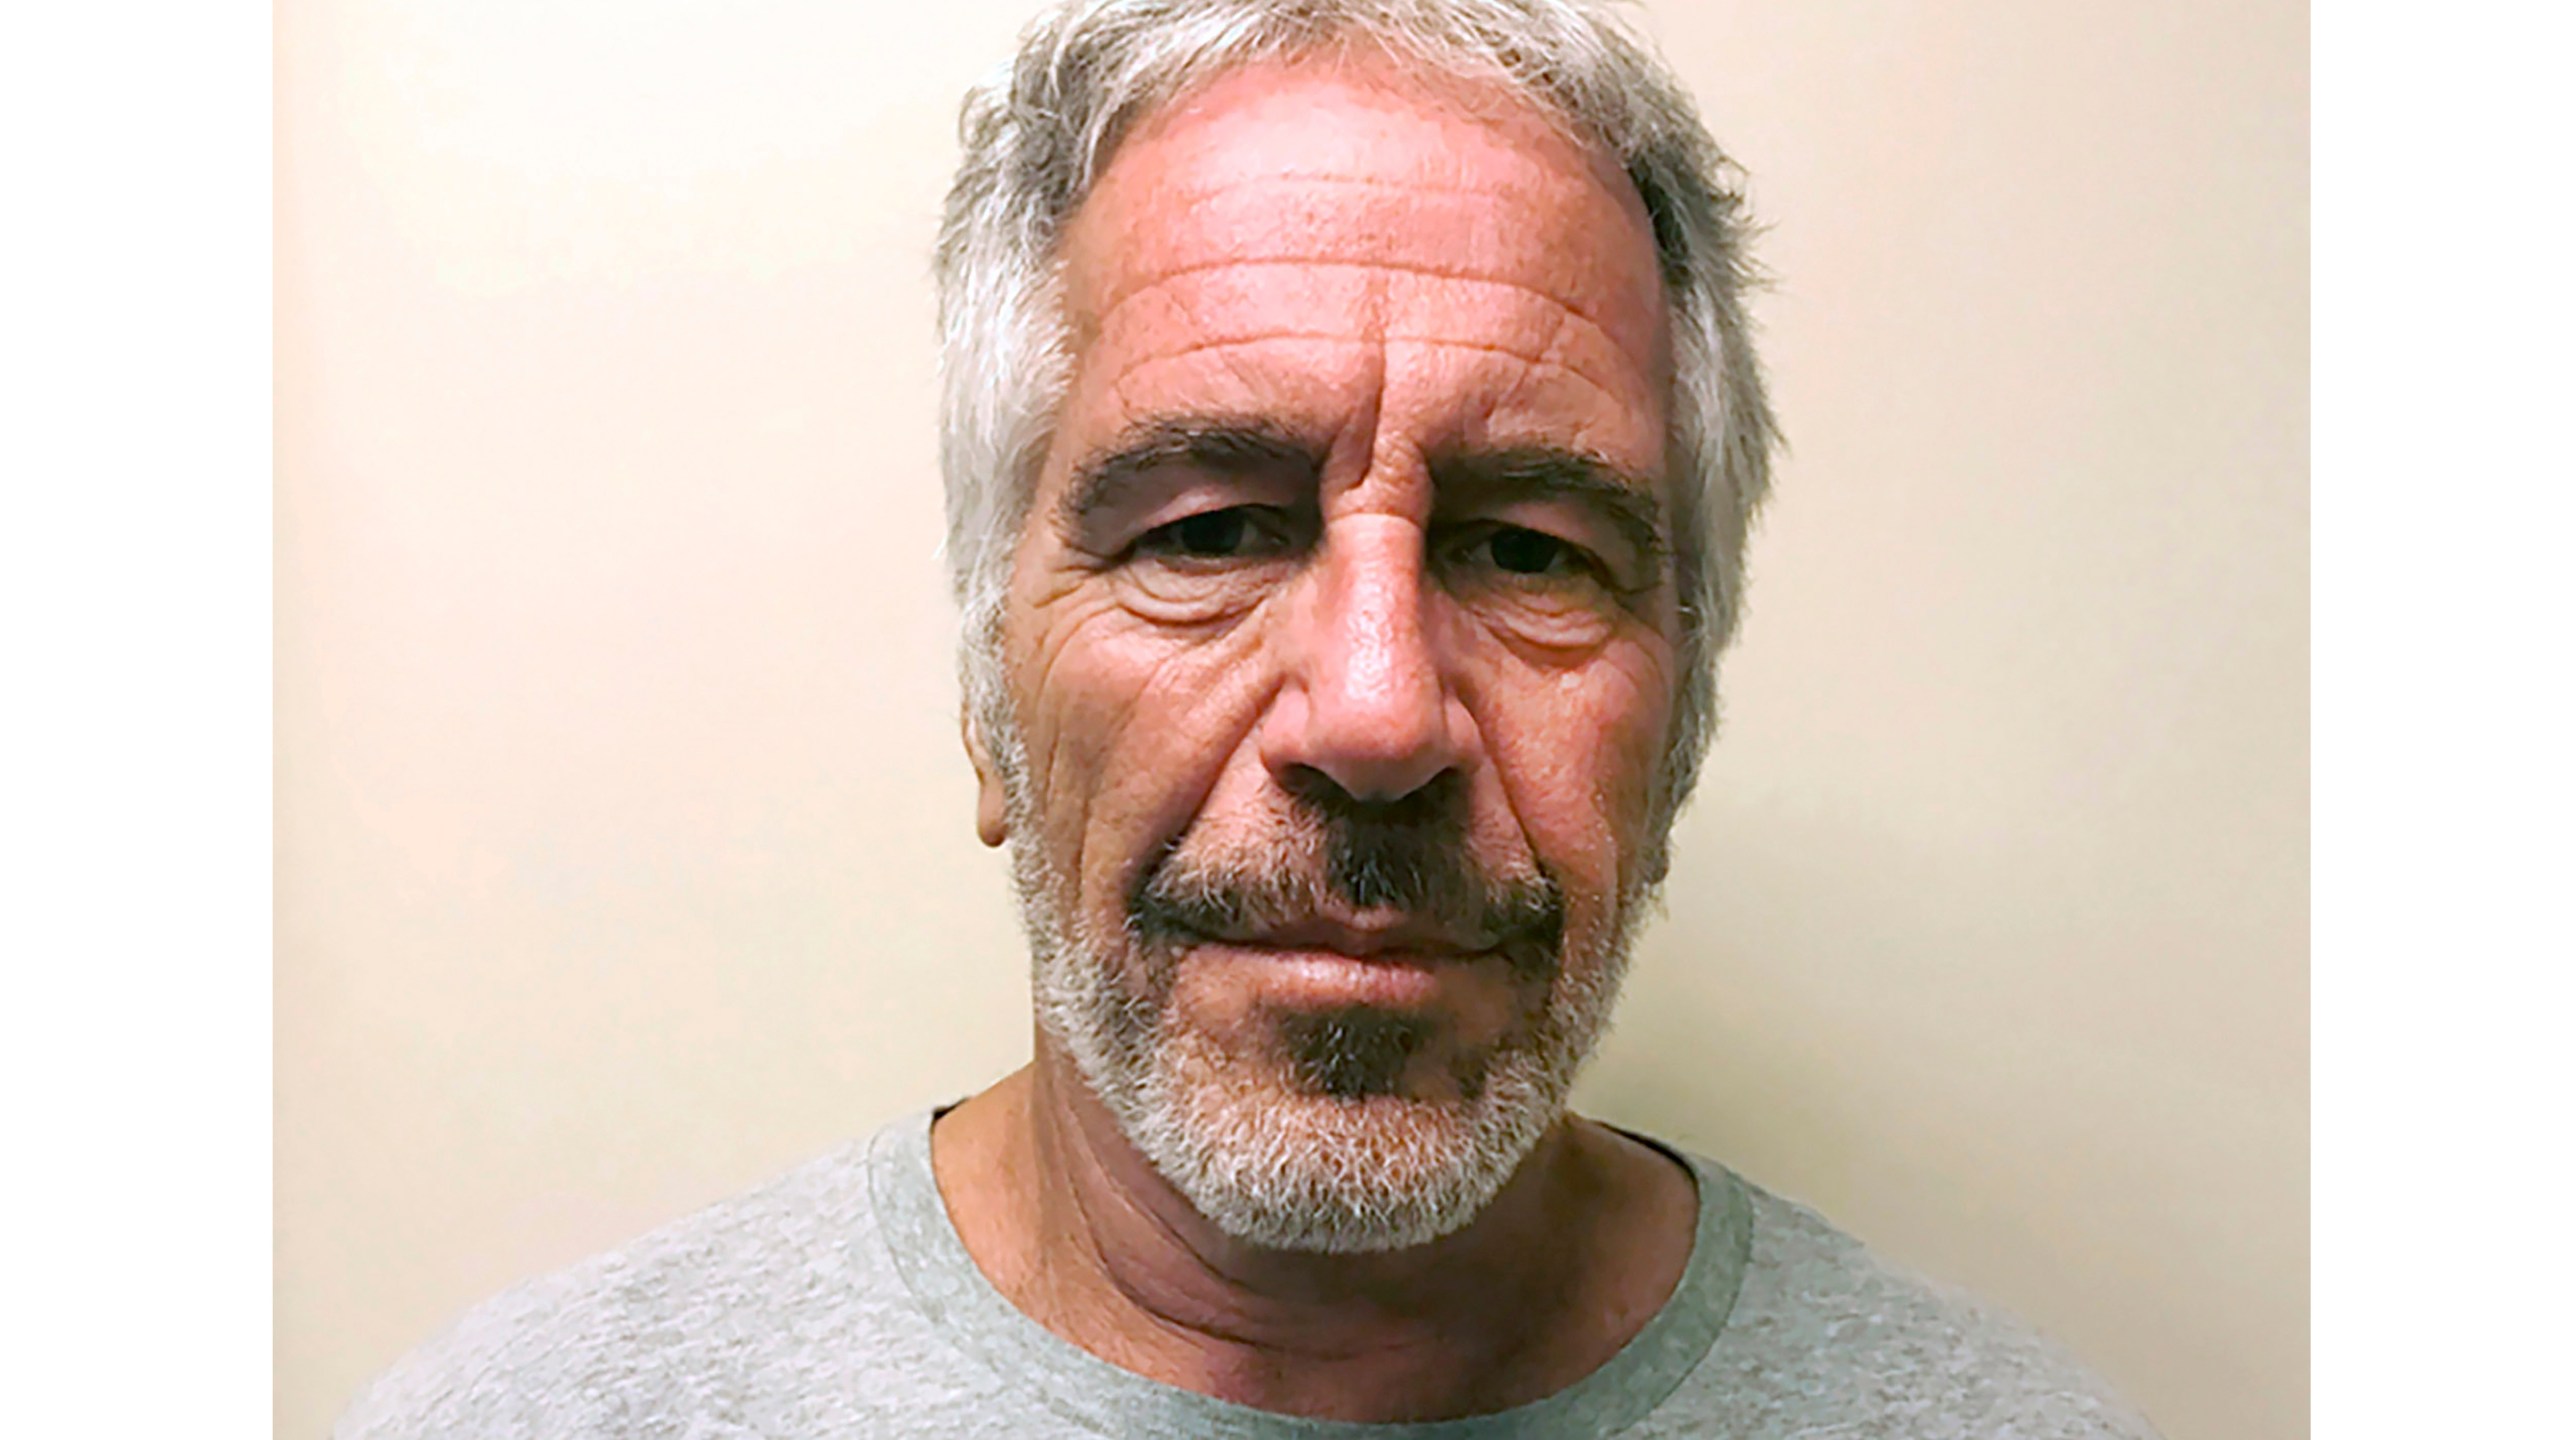 FILE - This photo provided by the New York State Sex Offender Registry shows Jeffrey Epstein, March 28, 2017. Imprisoned British socialite Ghislaine Maxwell’s lawyer asked a federal appeals court Tuesday, March 12, 2024, to toss out her sex trafficking conviction and 20-year prison sentence, saying Epstein’s 2007 non-prosecution deal with a U.S. attorney in Florida should have prevented her prosecution. (New York State Sex Offender Registry via AP, File)